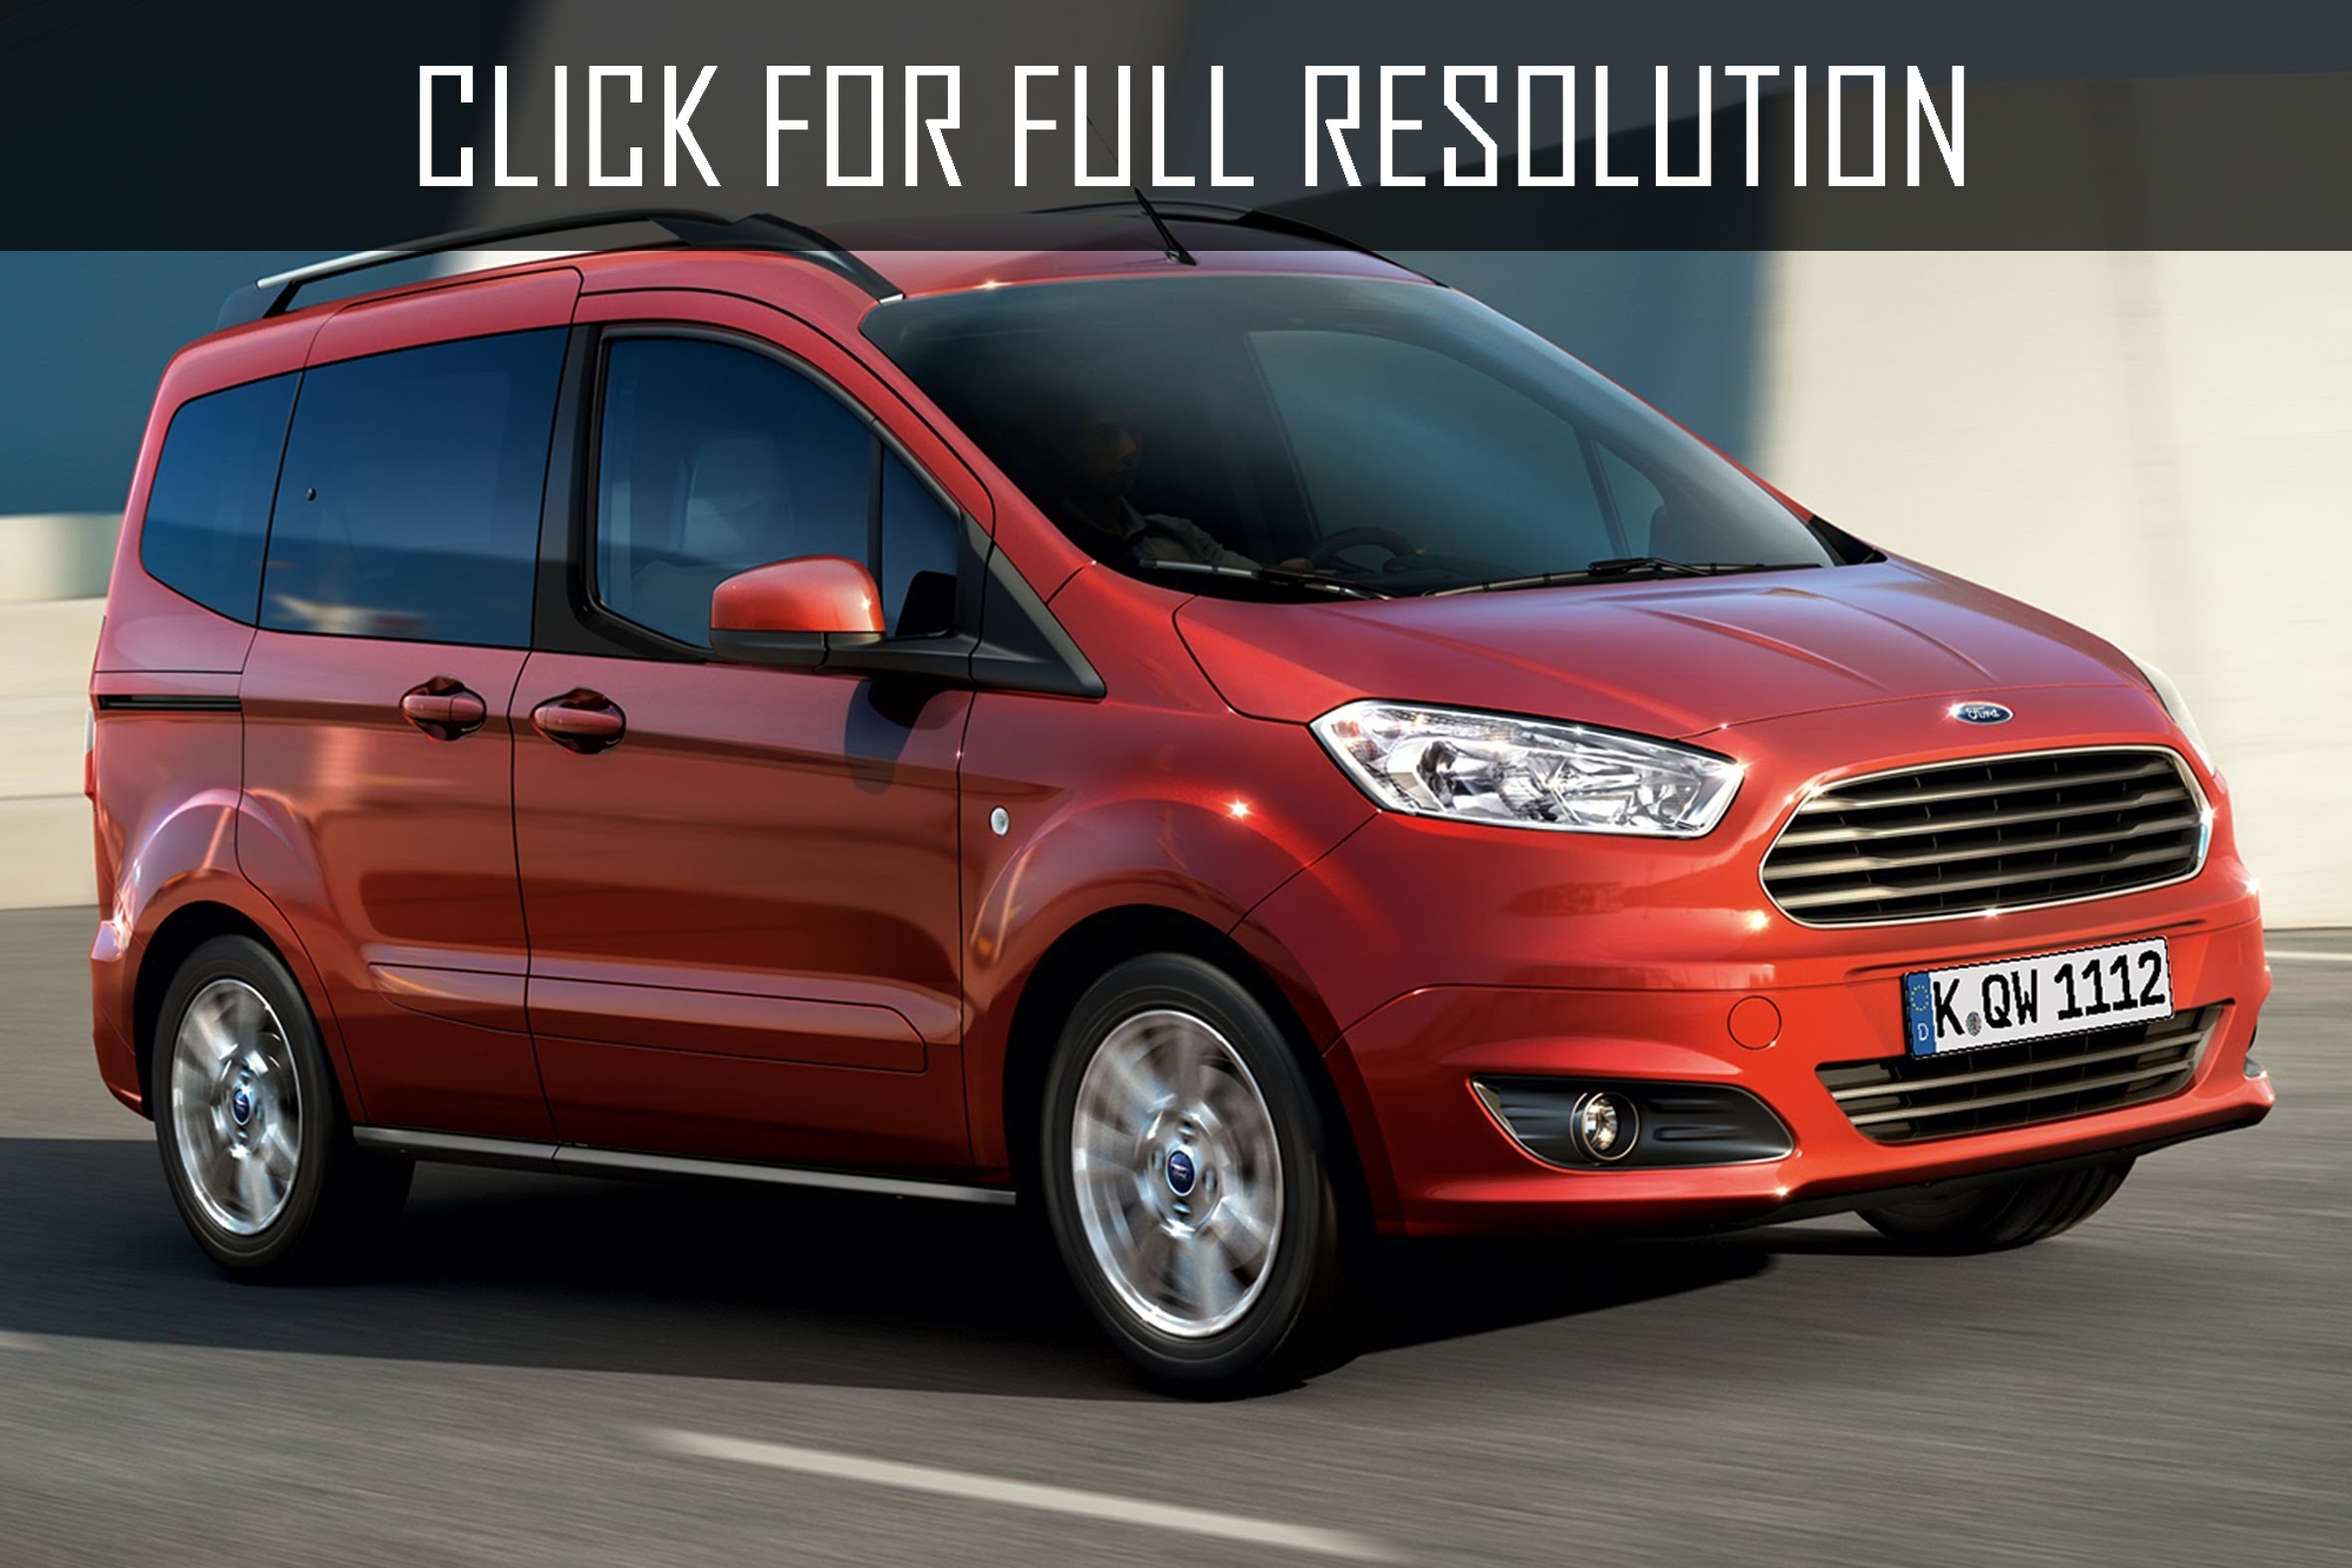 2014 Ford Courier news, reviews, msrp, ratings with